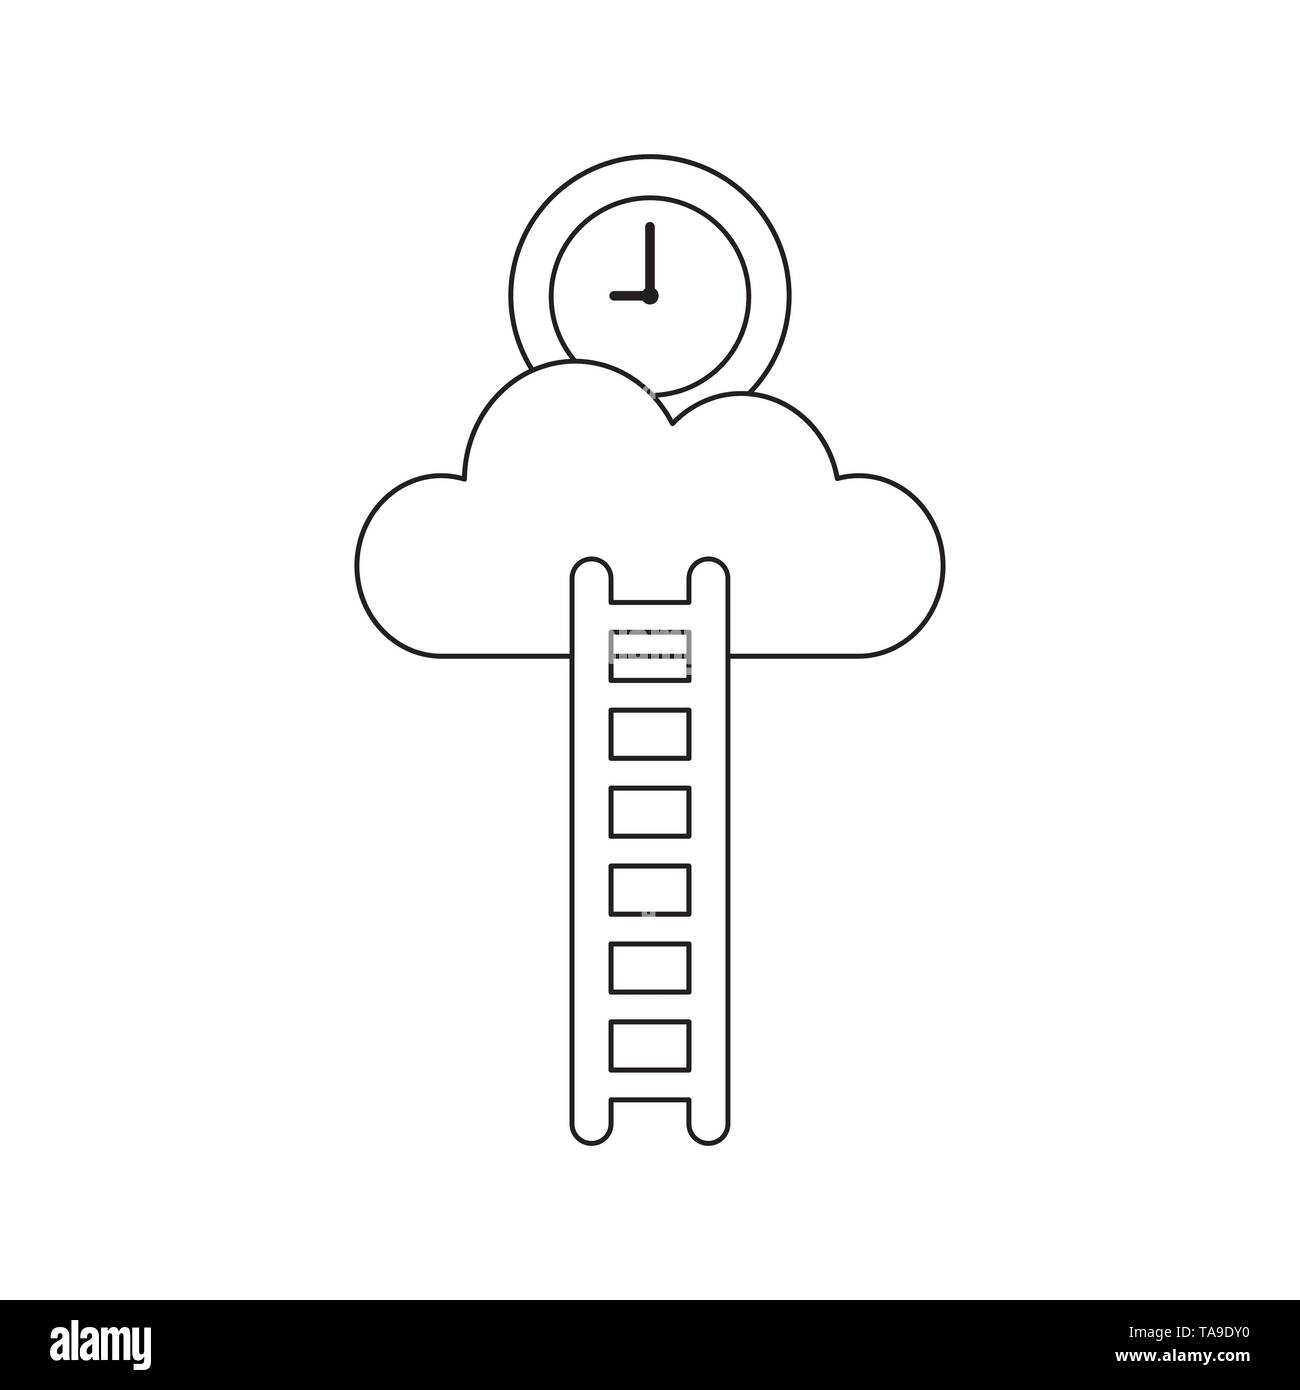 Vector icon concept of reach clock on cloud with ladder. Black outlines. Stock Vector